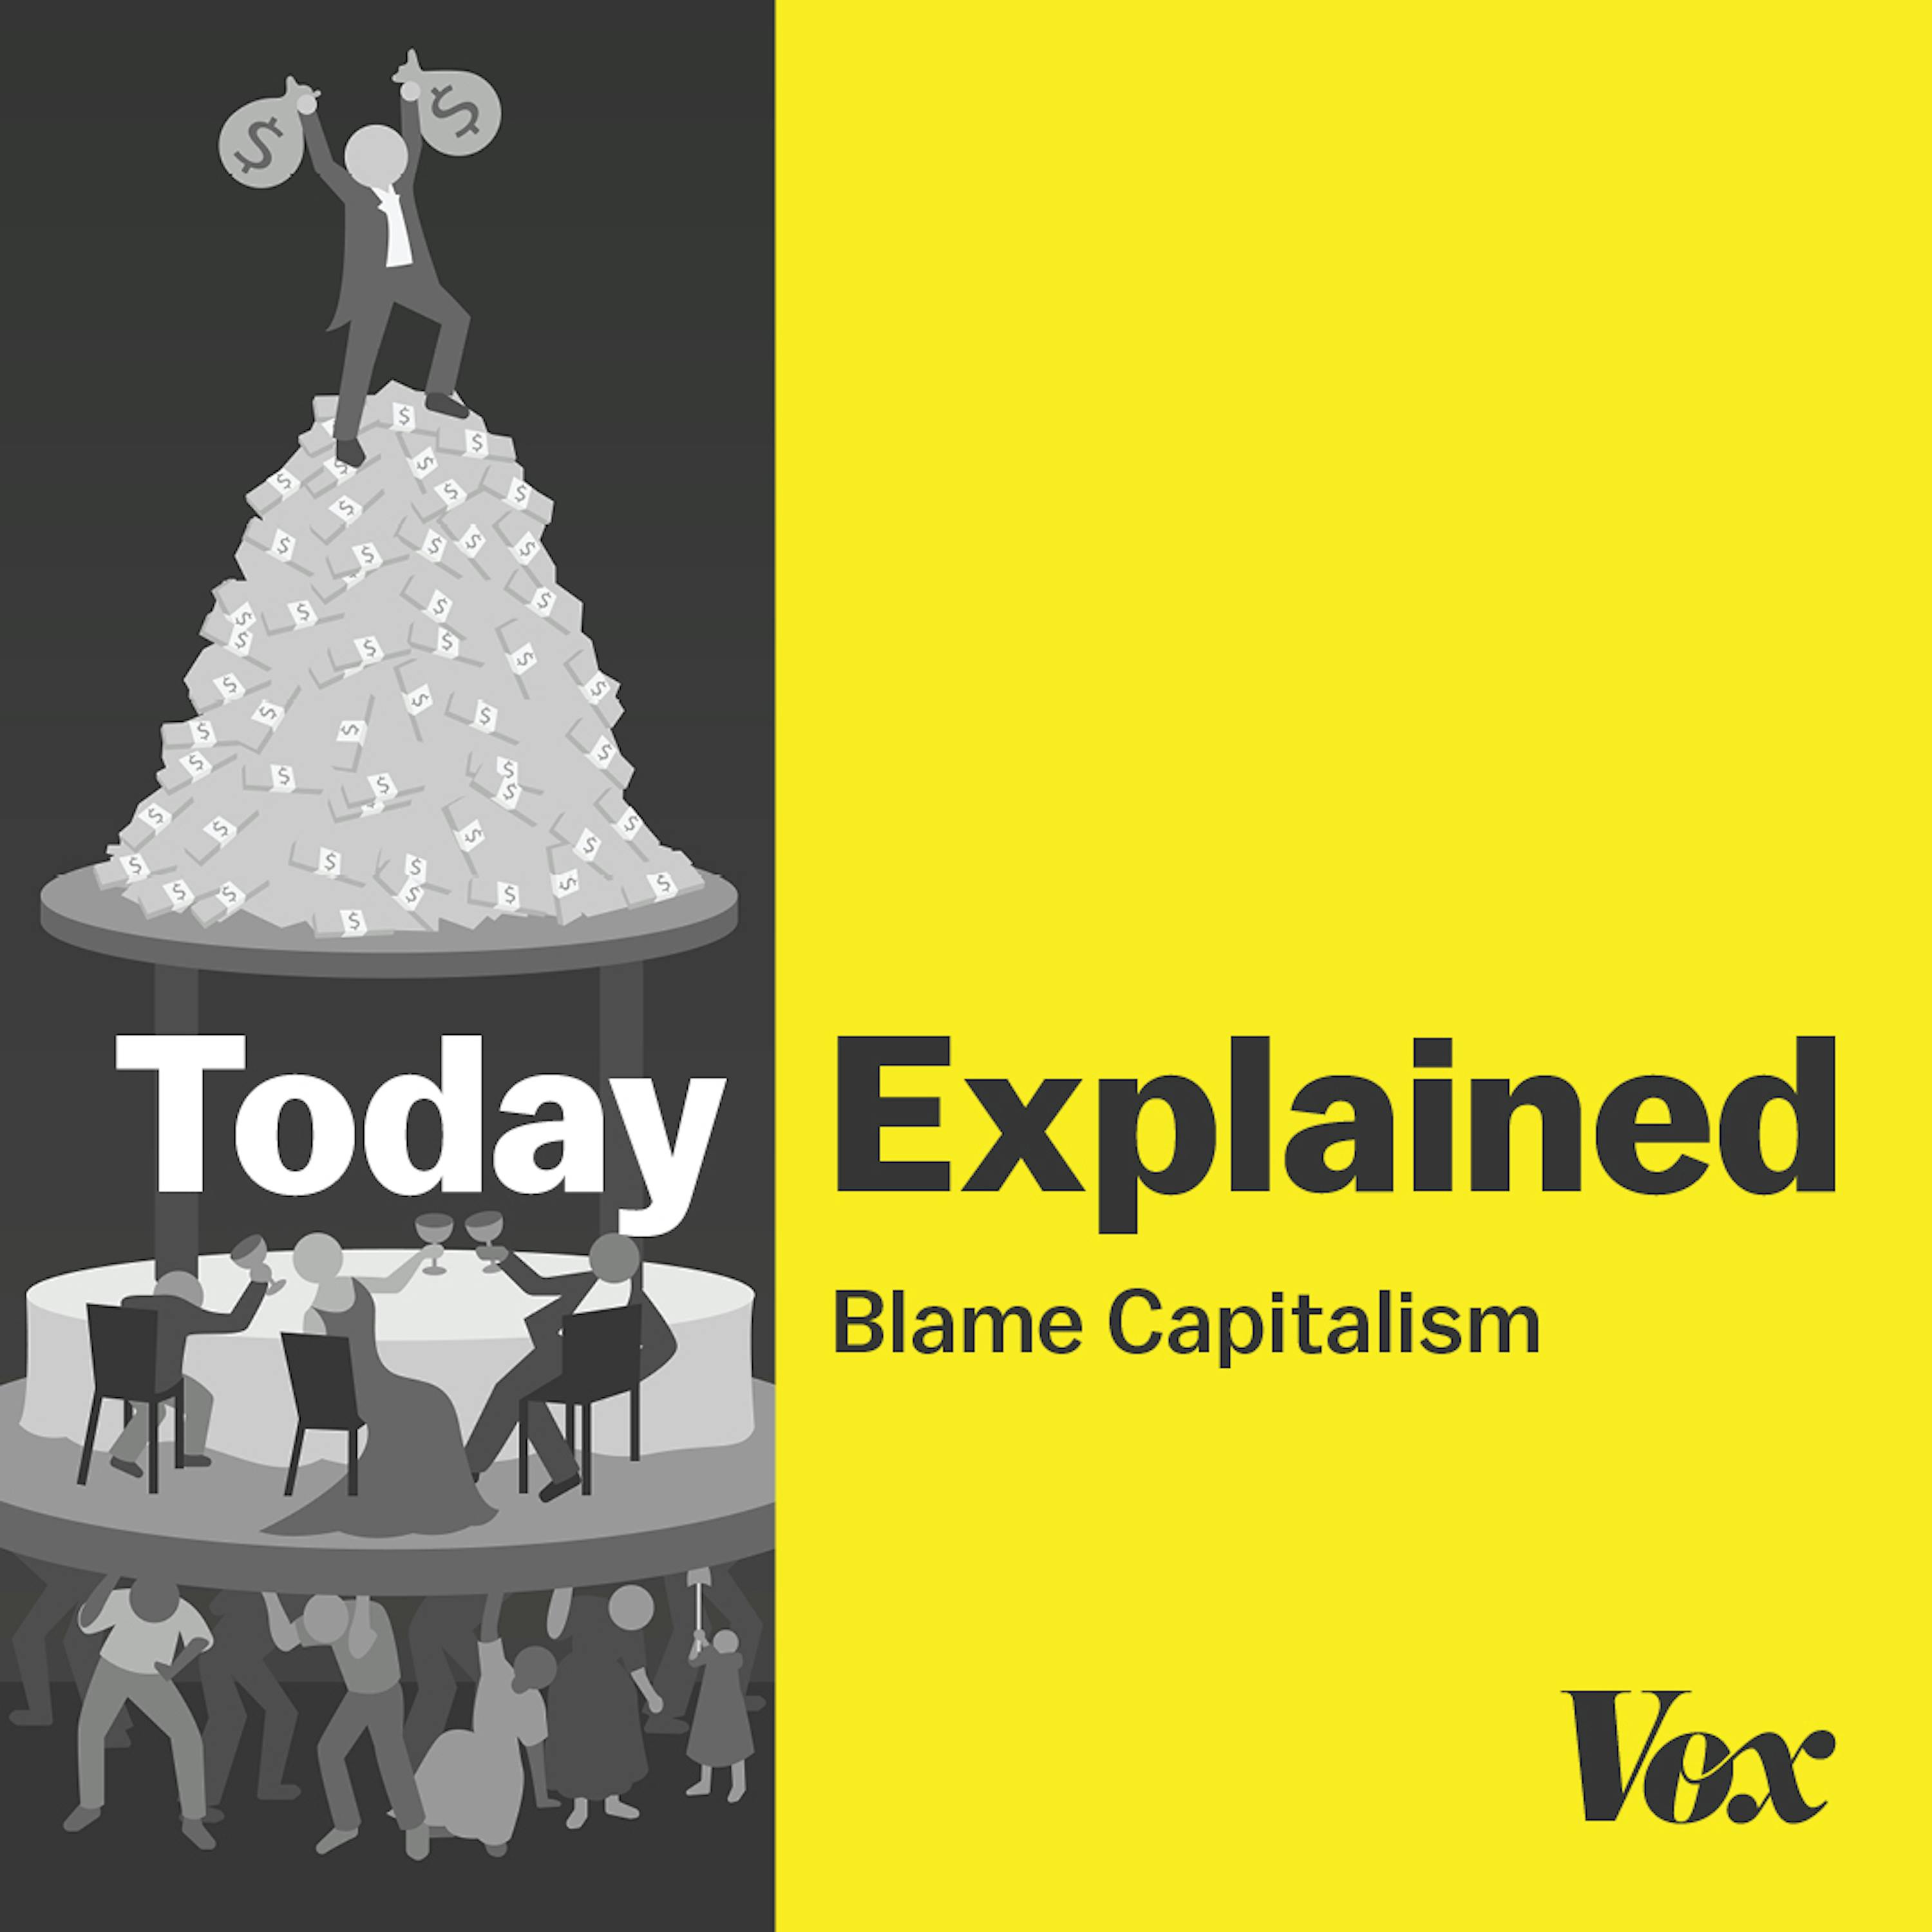 Blame Capitalism: Souring on the system